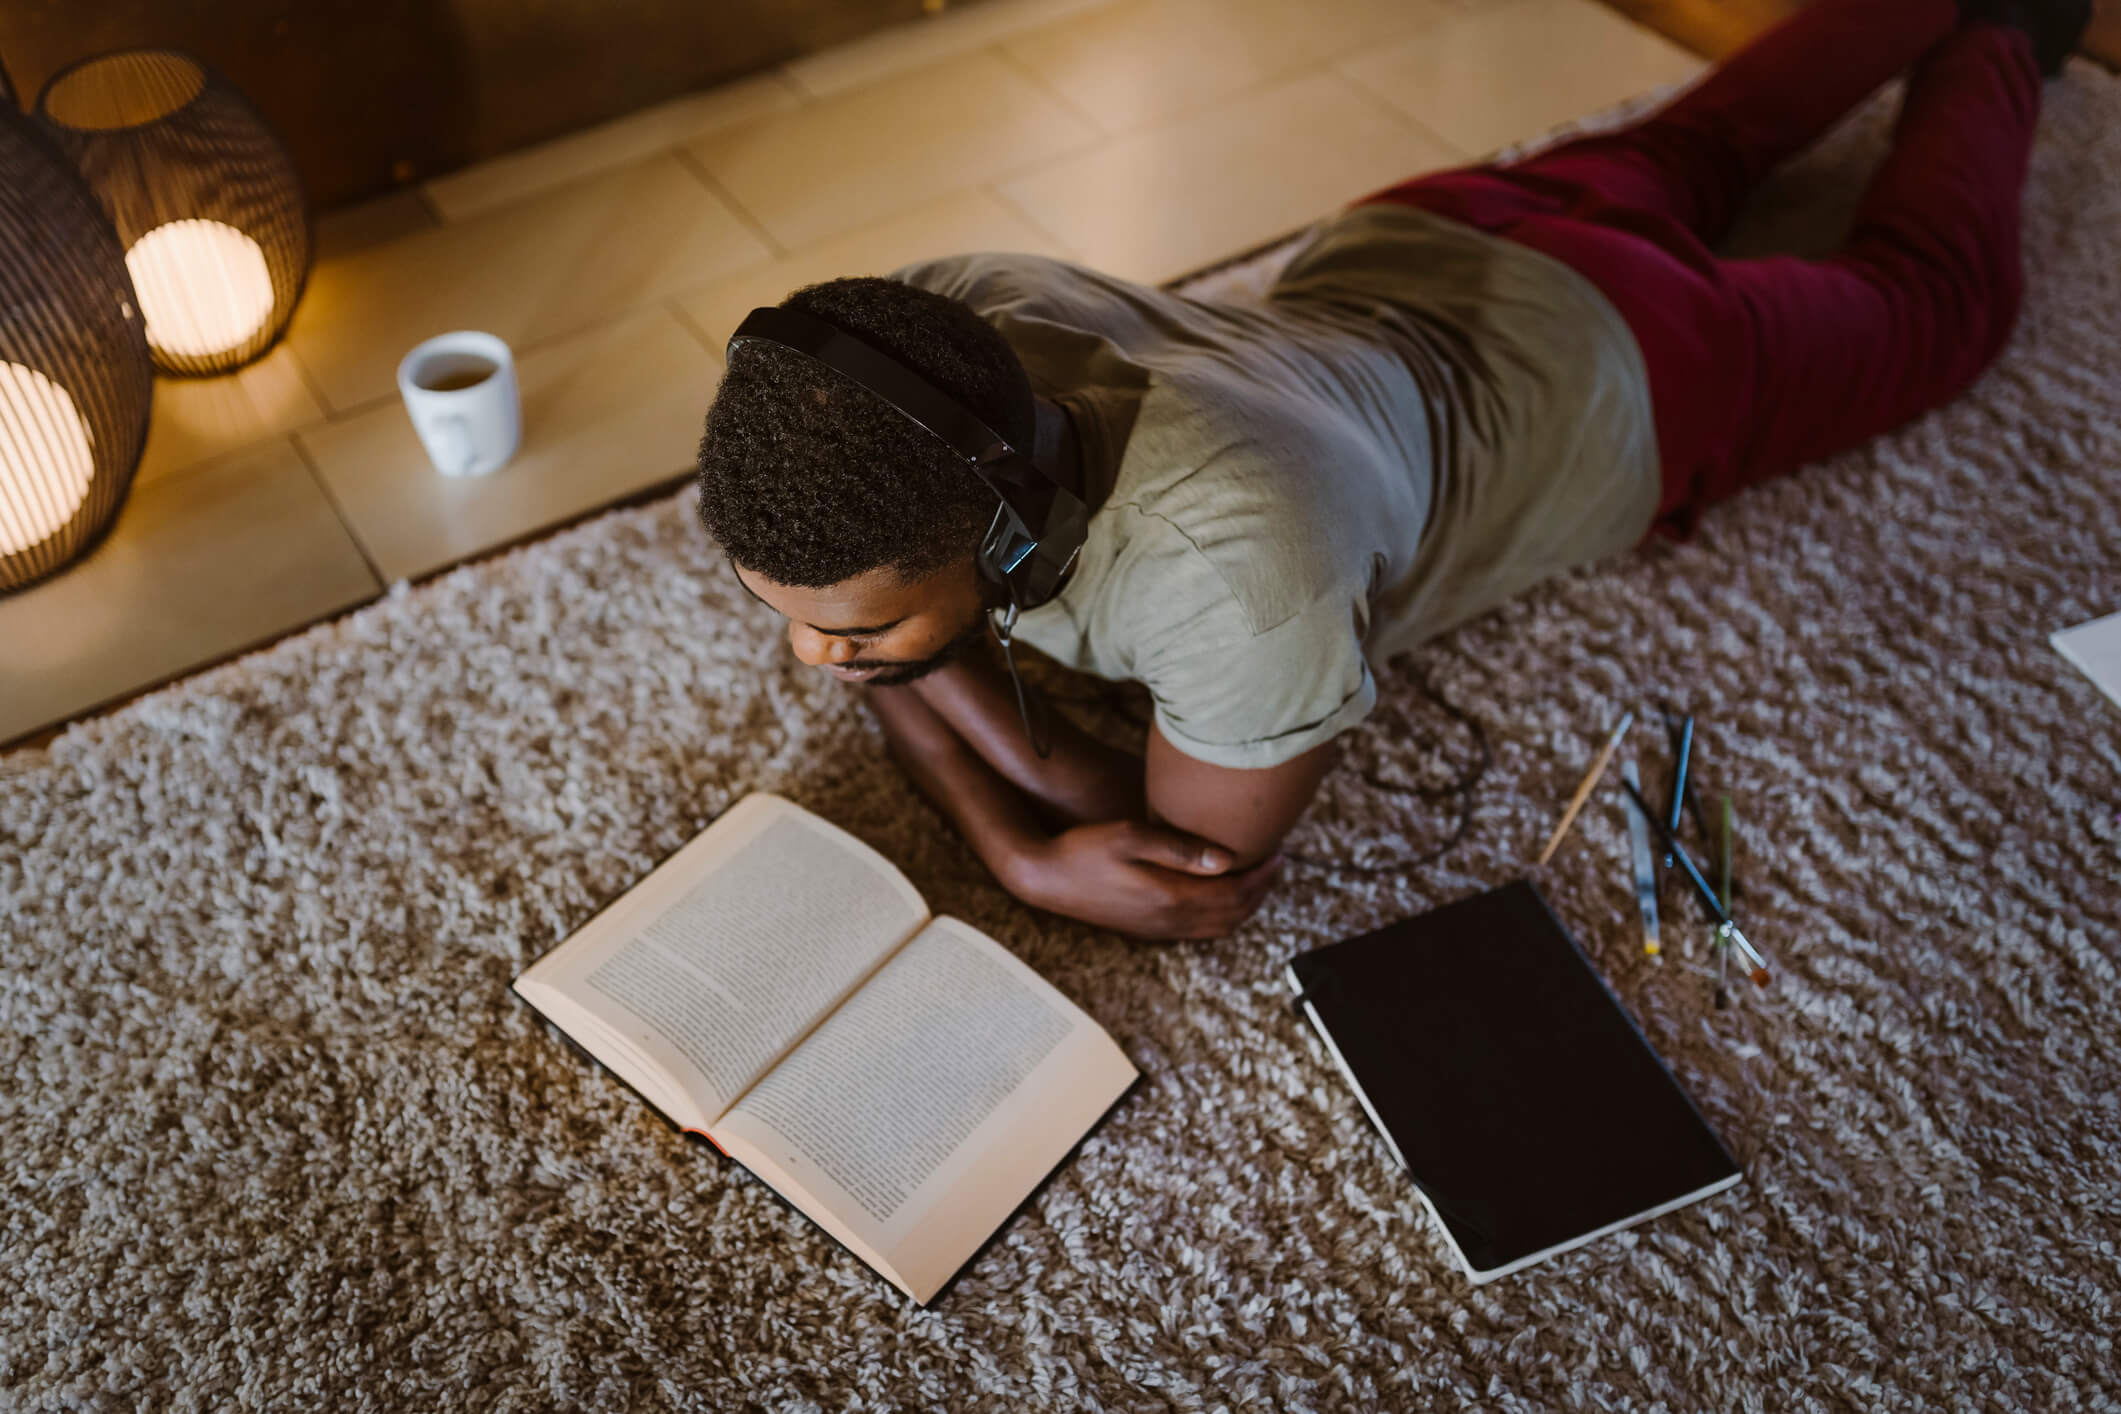 A man wearing headphones and a gray shirt lies on his stomach on a carpeted floor while reading a book on child development.